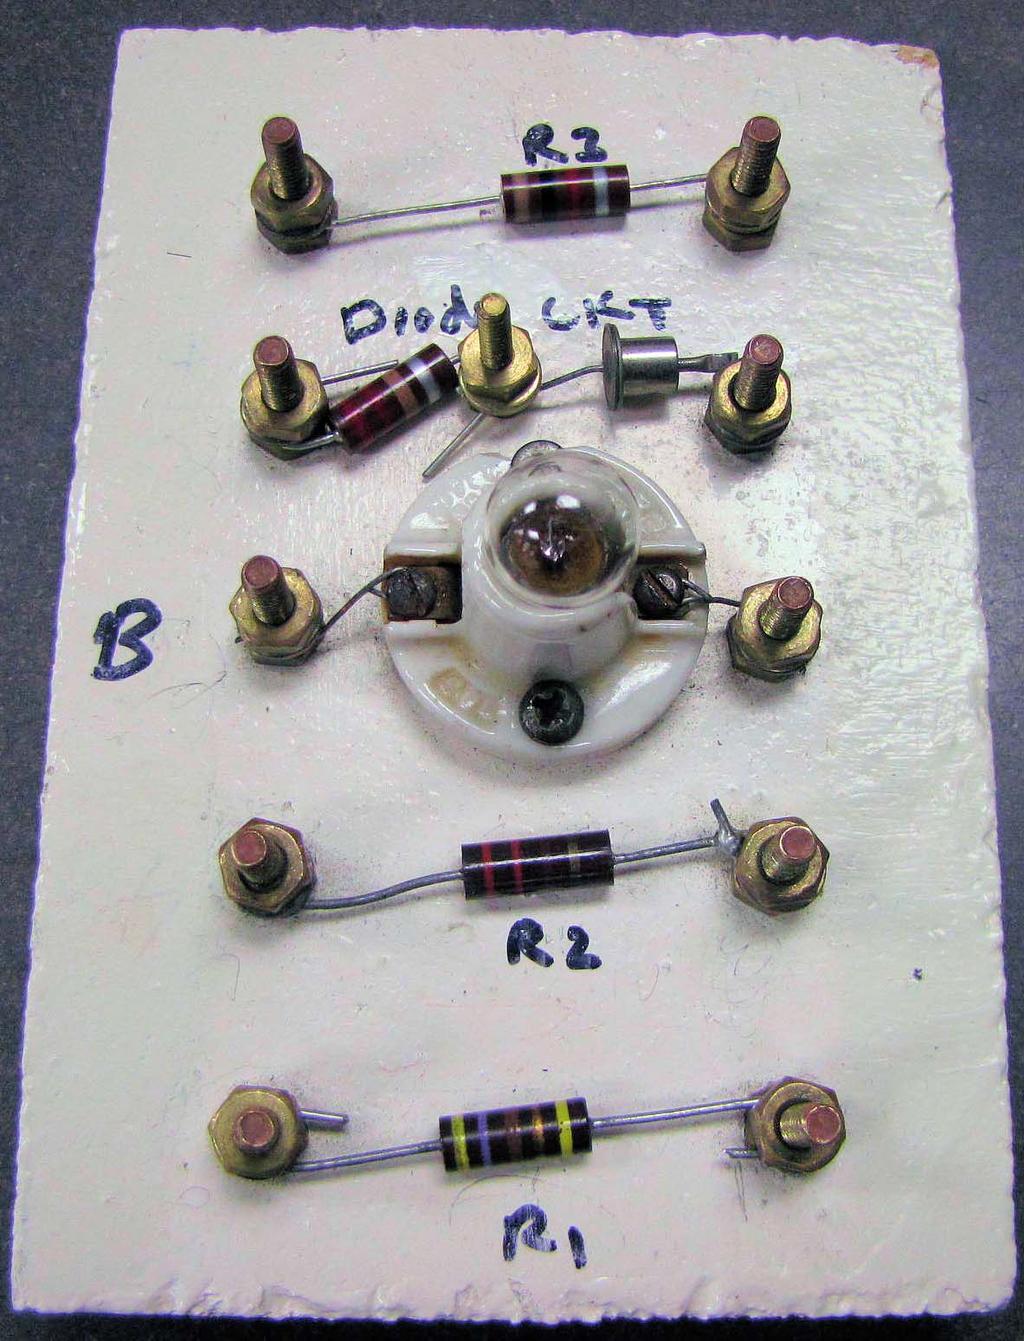 6 Figure 7 shows the board with 6 components on it: 4 color-coded resistors, one flashlight bulb (the one on your board may look a bit different from the one in the figure), and one silicon diode.